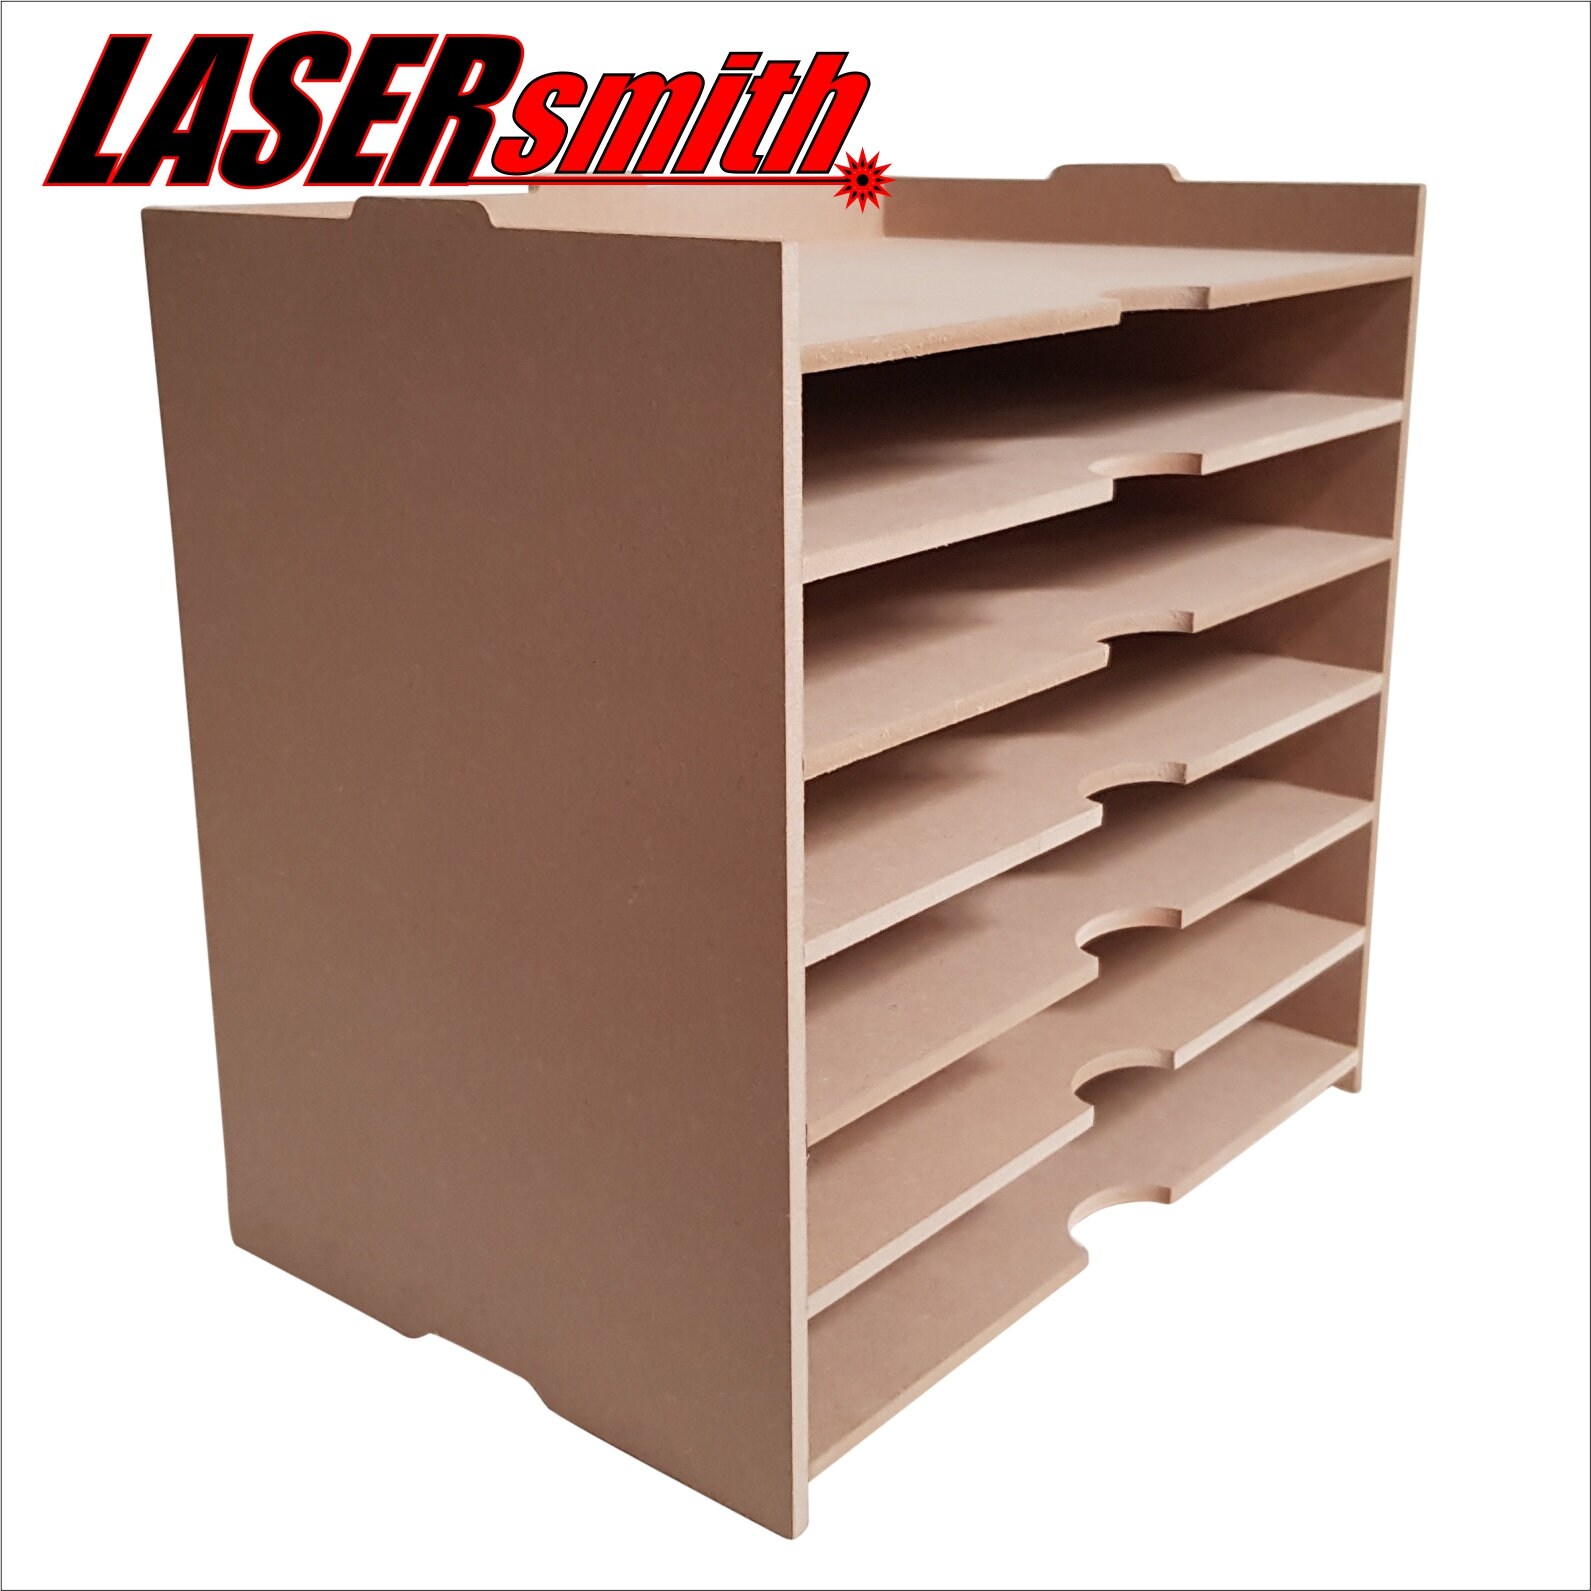 Lasersmith - Our Kallax storage system is a game changer!! We have